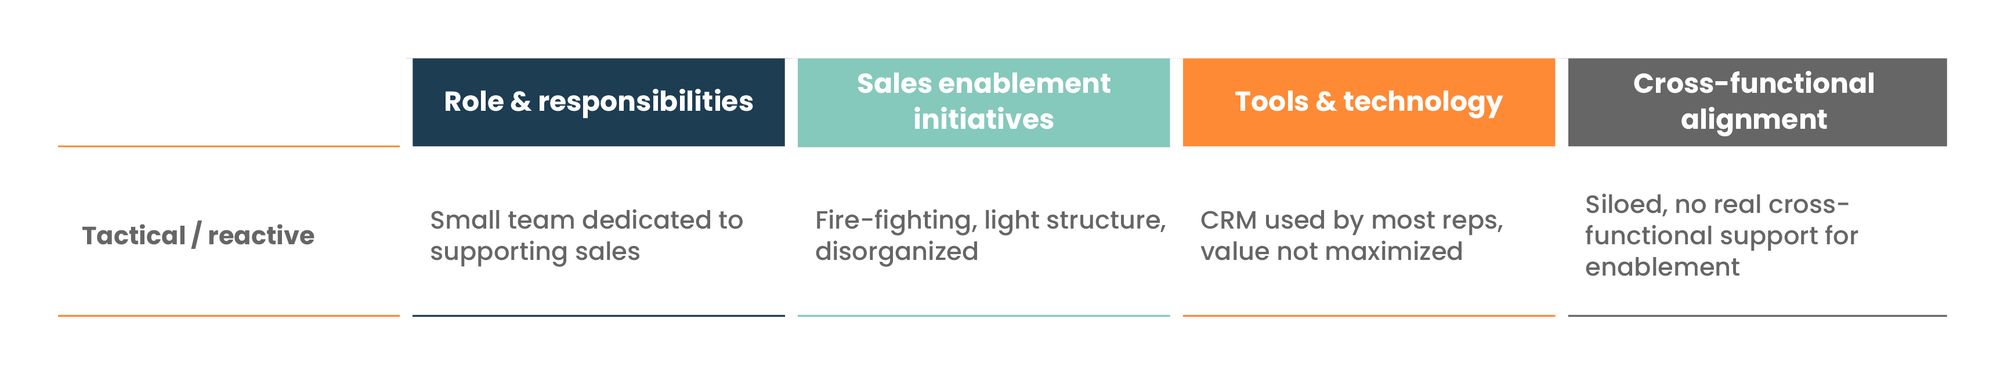 Tactical / reactive sales enablement maturity stage